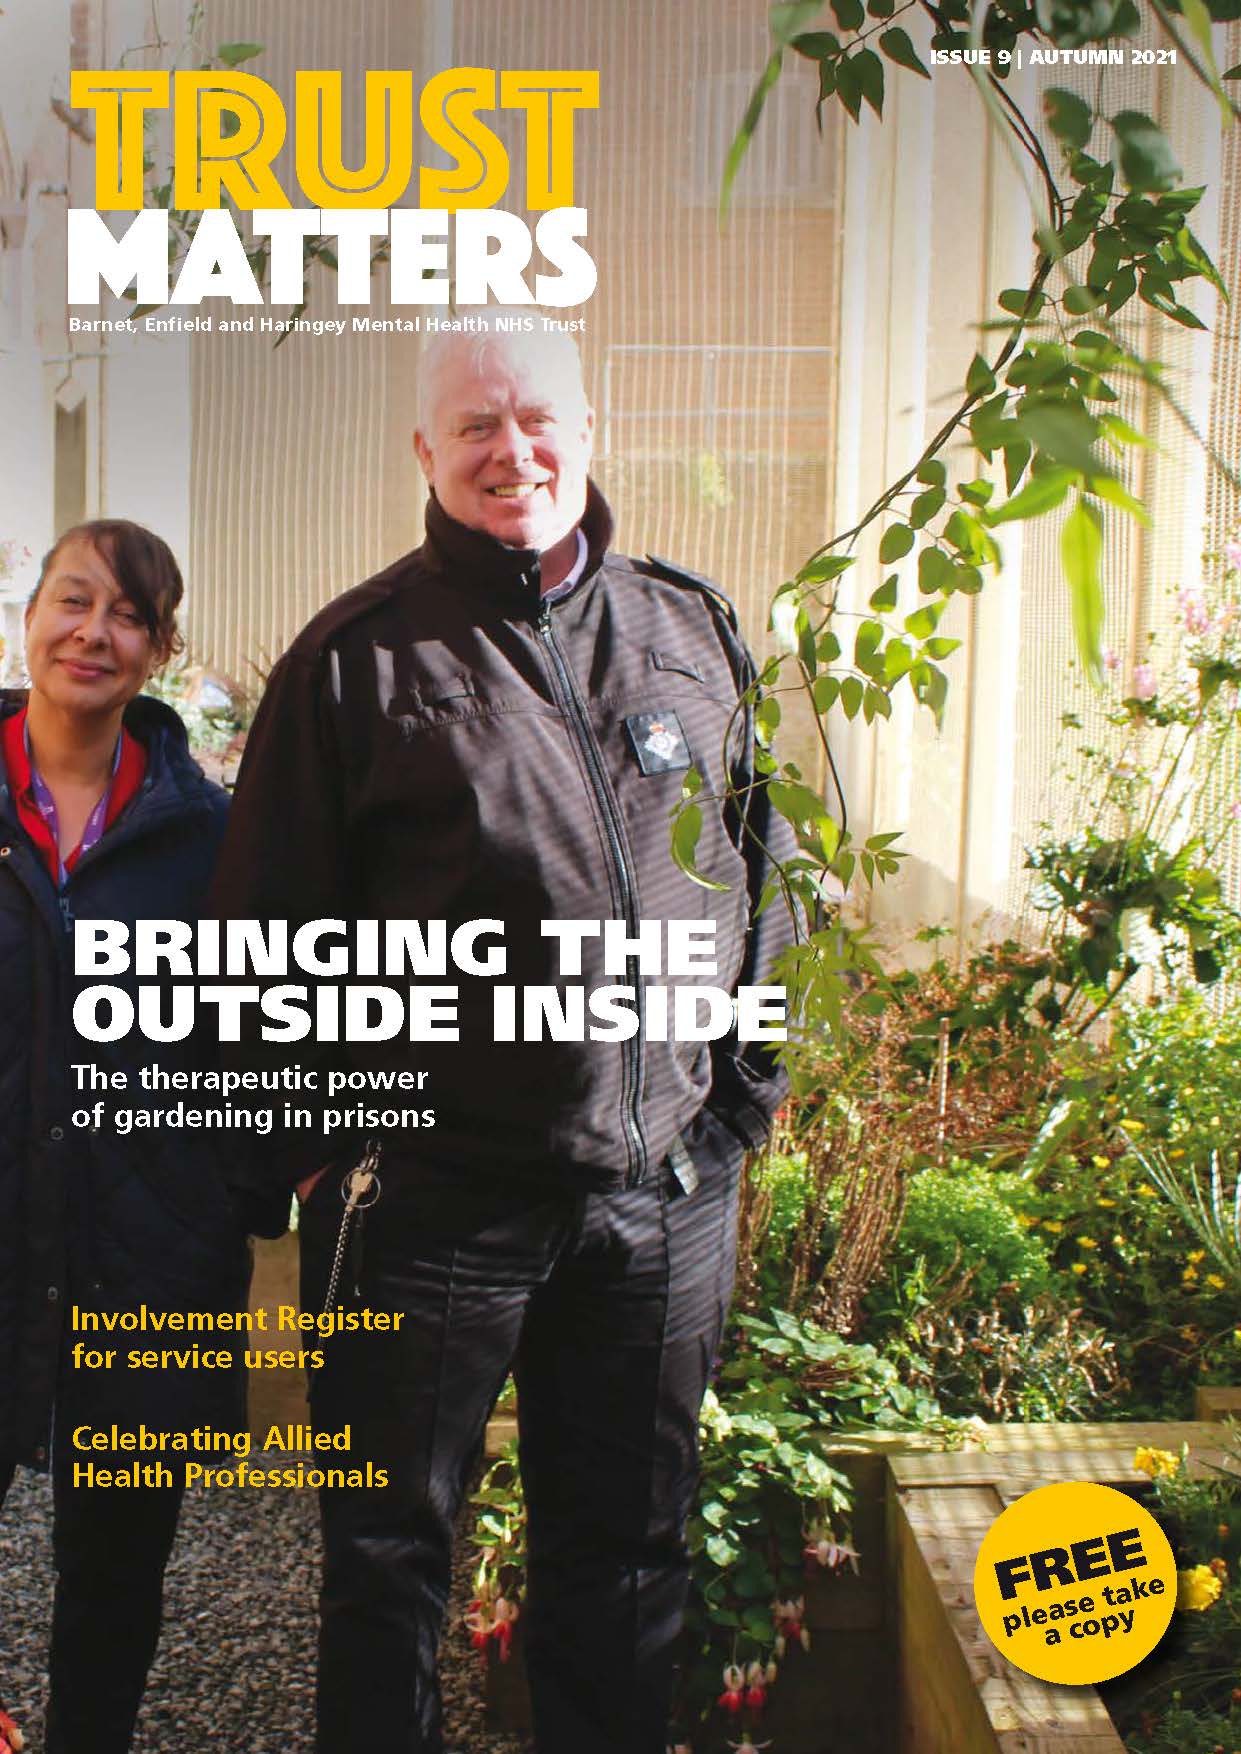 Trust Matters Issue 9 Autumn 2021 cover page